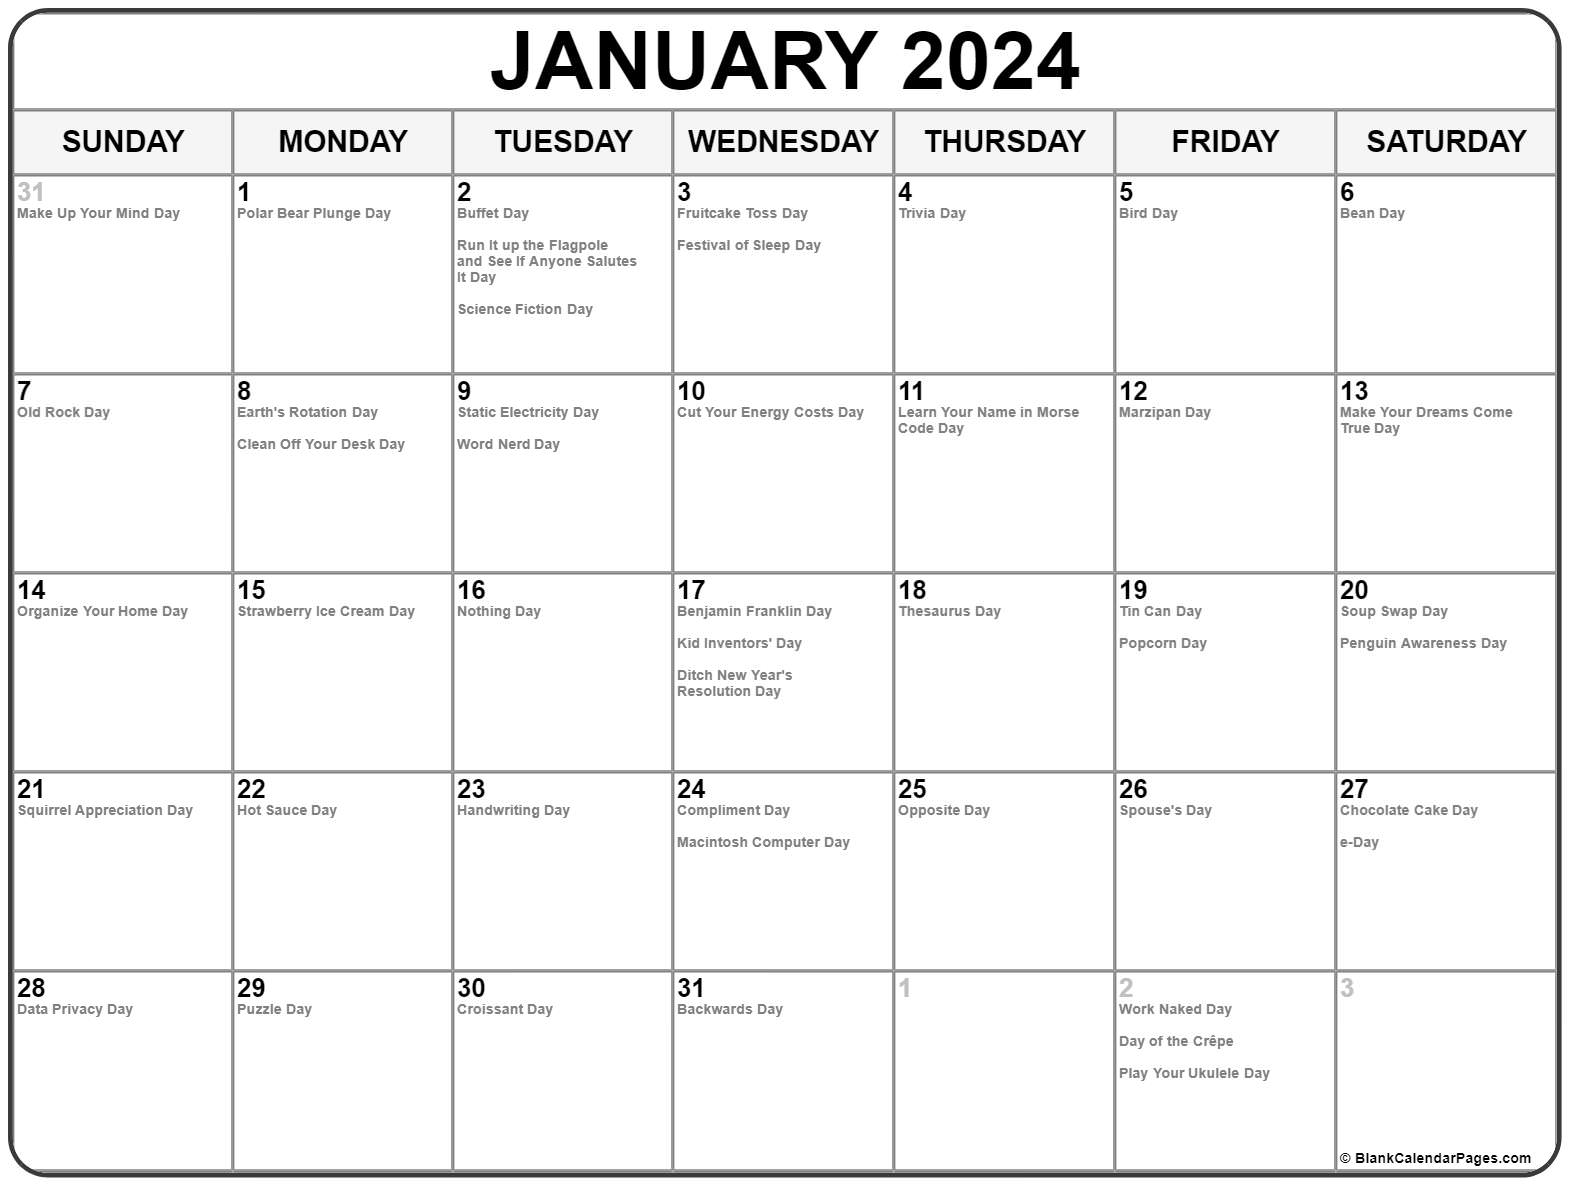 2023 Calendar Events And Holidays Time and Date Calendar 2023 Canada